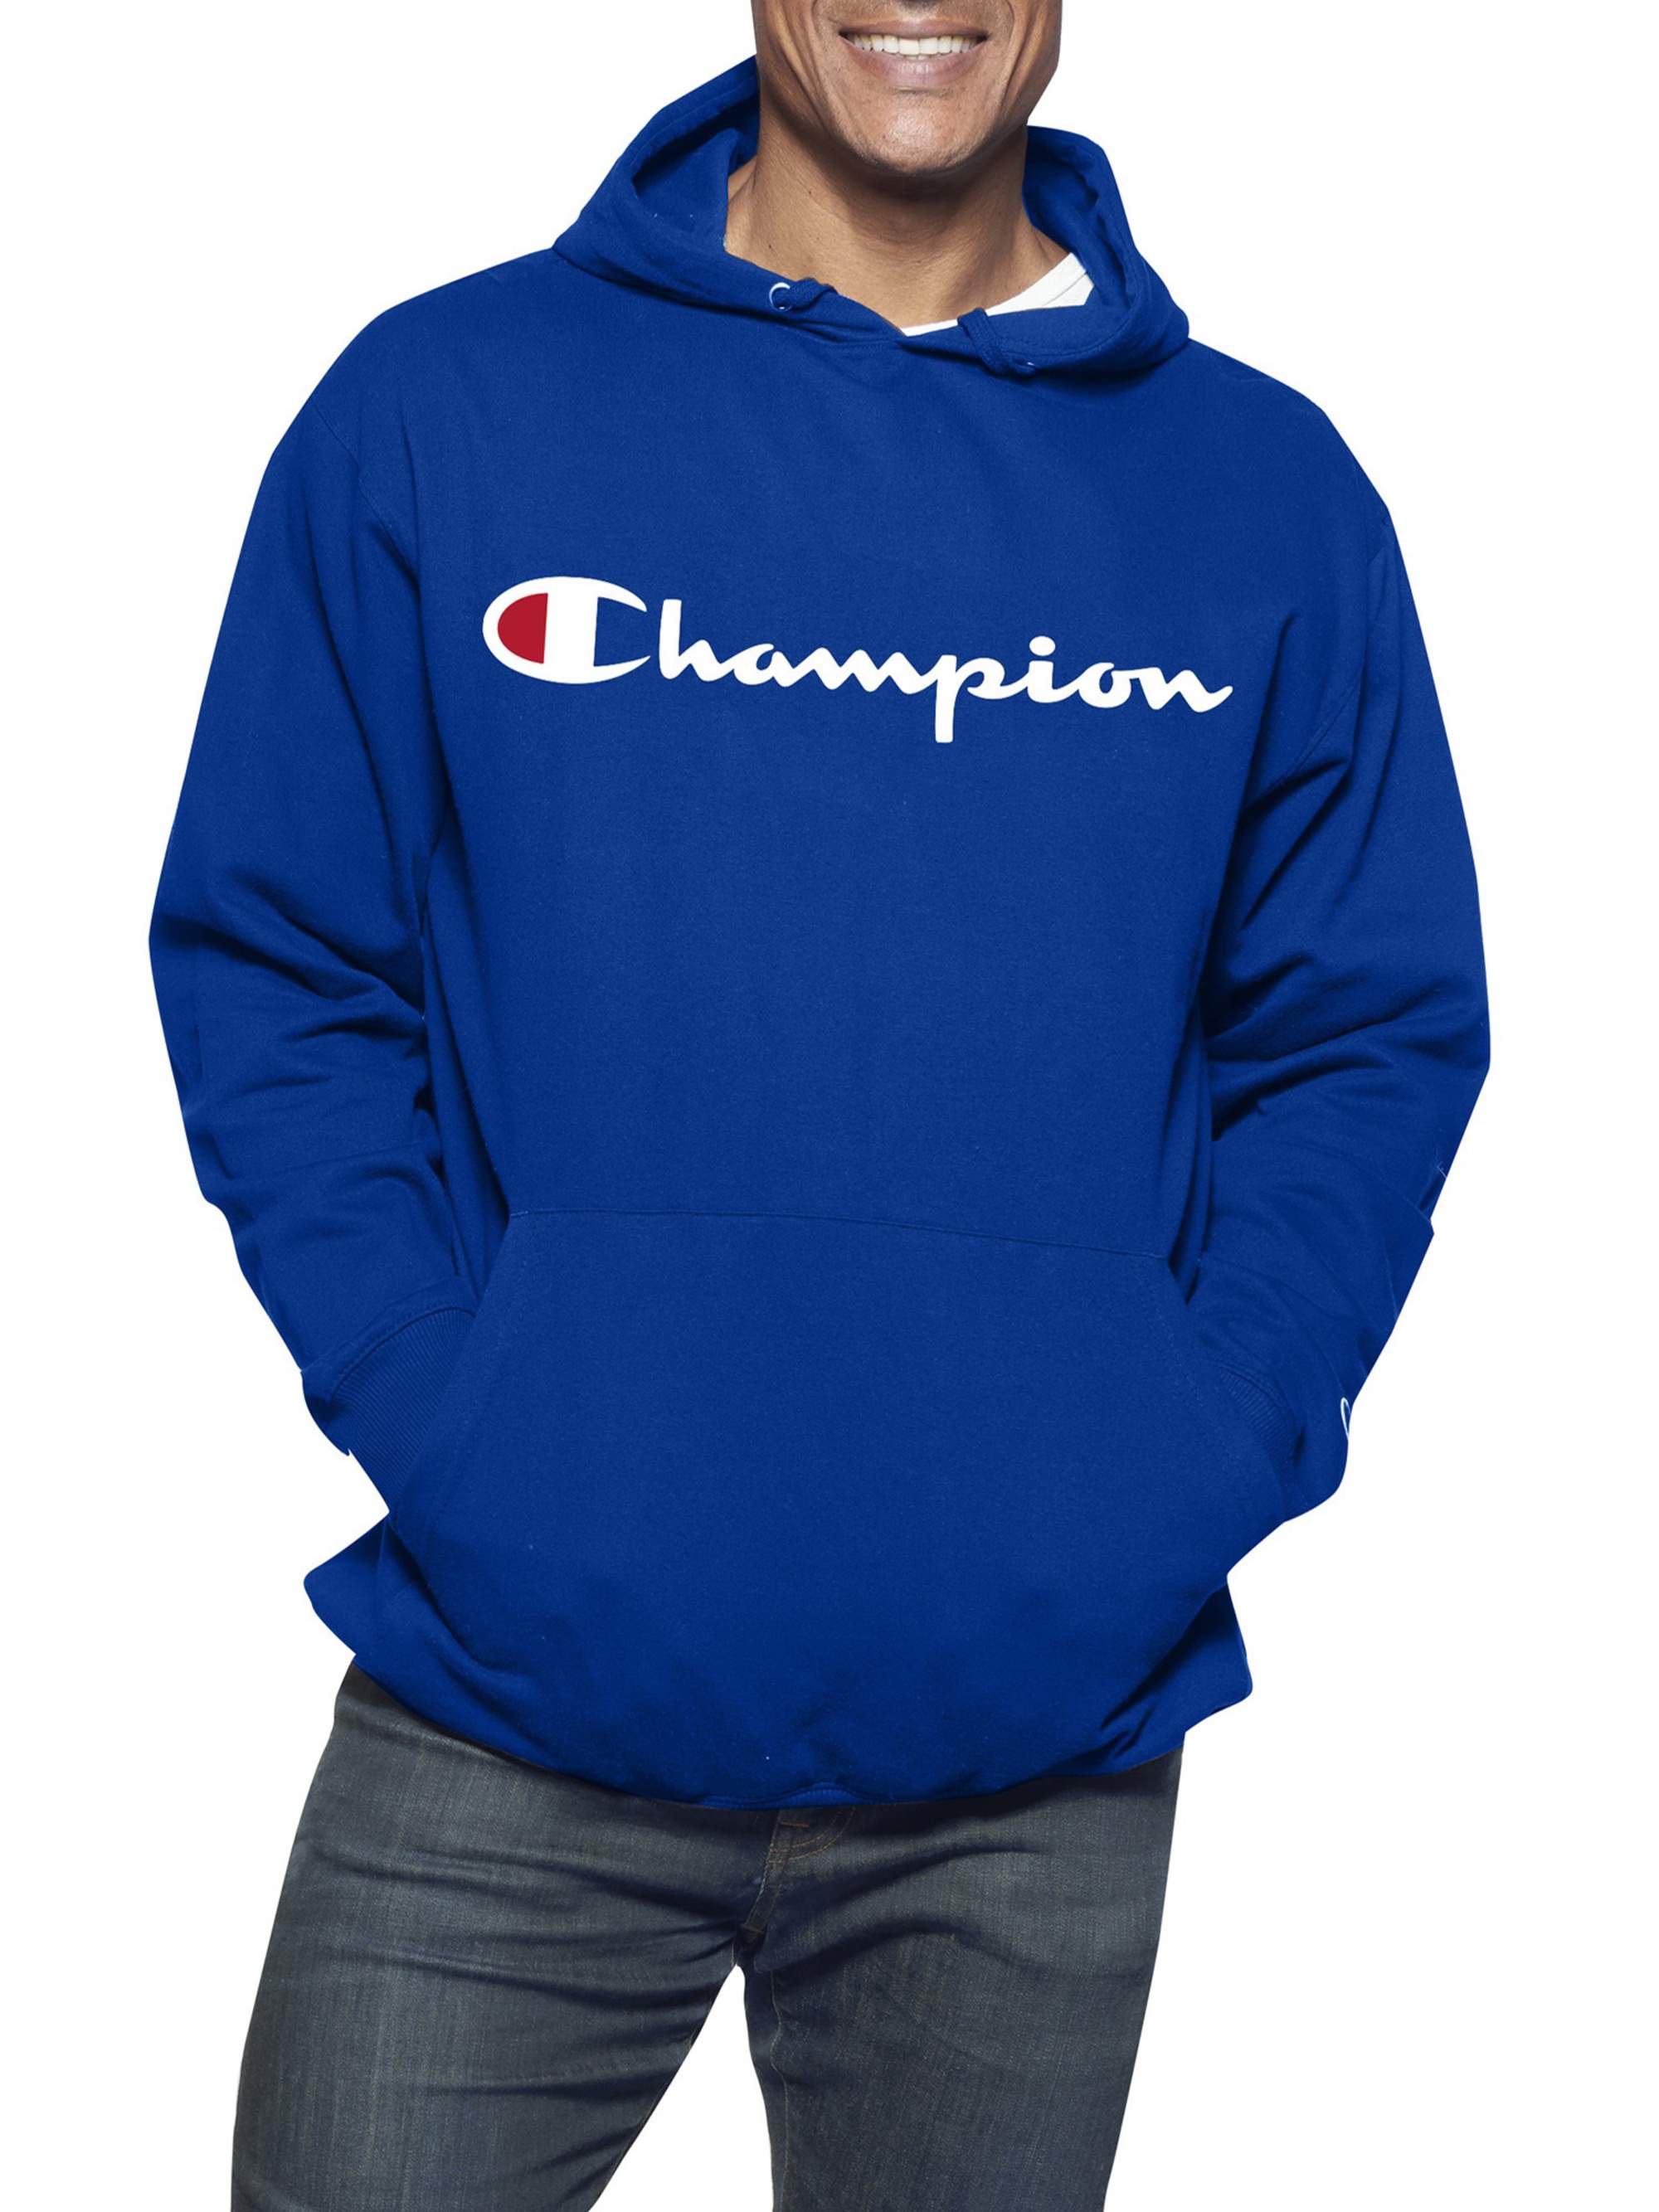 Champion Men's Big and Tall Powerblend Graphic Fleece Pullover Hoodie, up to Size 6XL - image 1 of 1